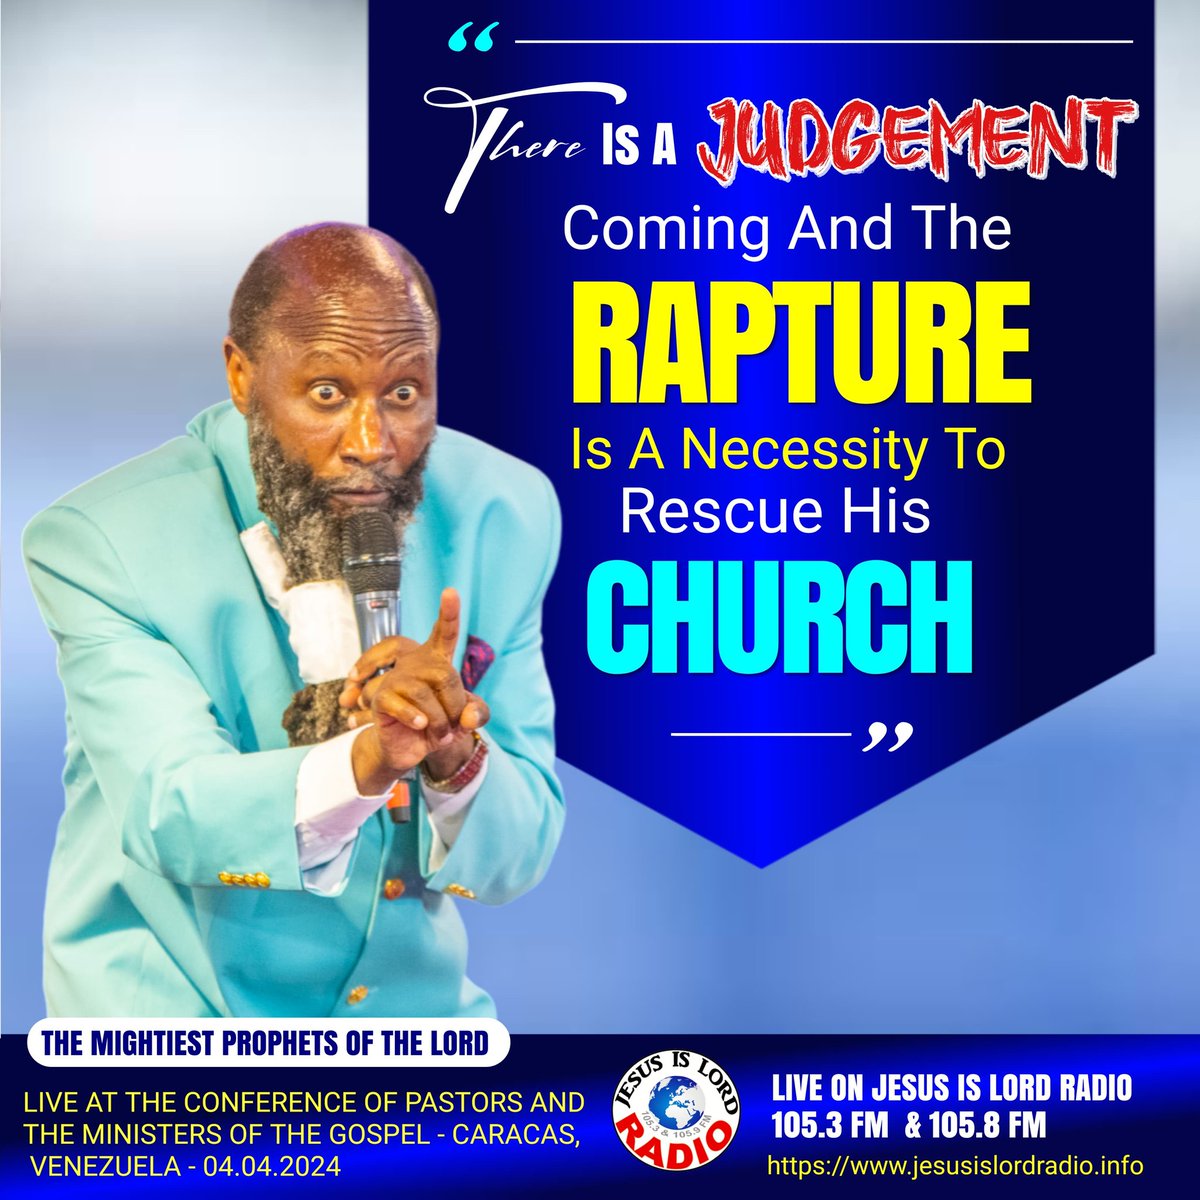 #PulpitReplacement
JESUS is the one who began the church age at Pentecost and HE is the one who will come to bring to an end the church age at The Rapture.